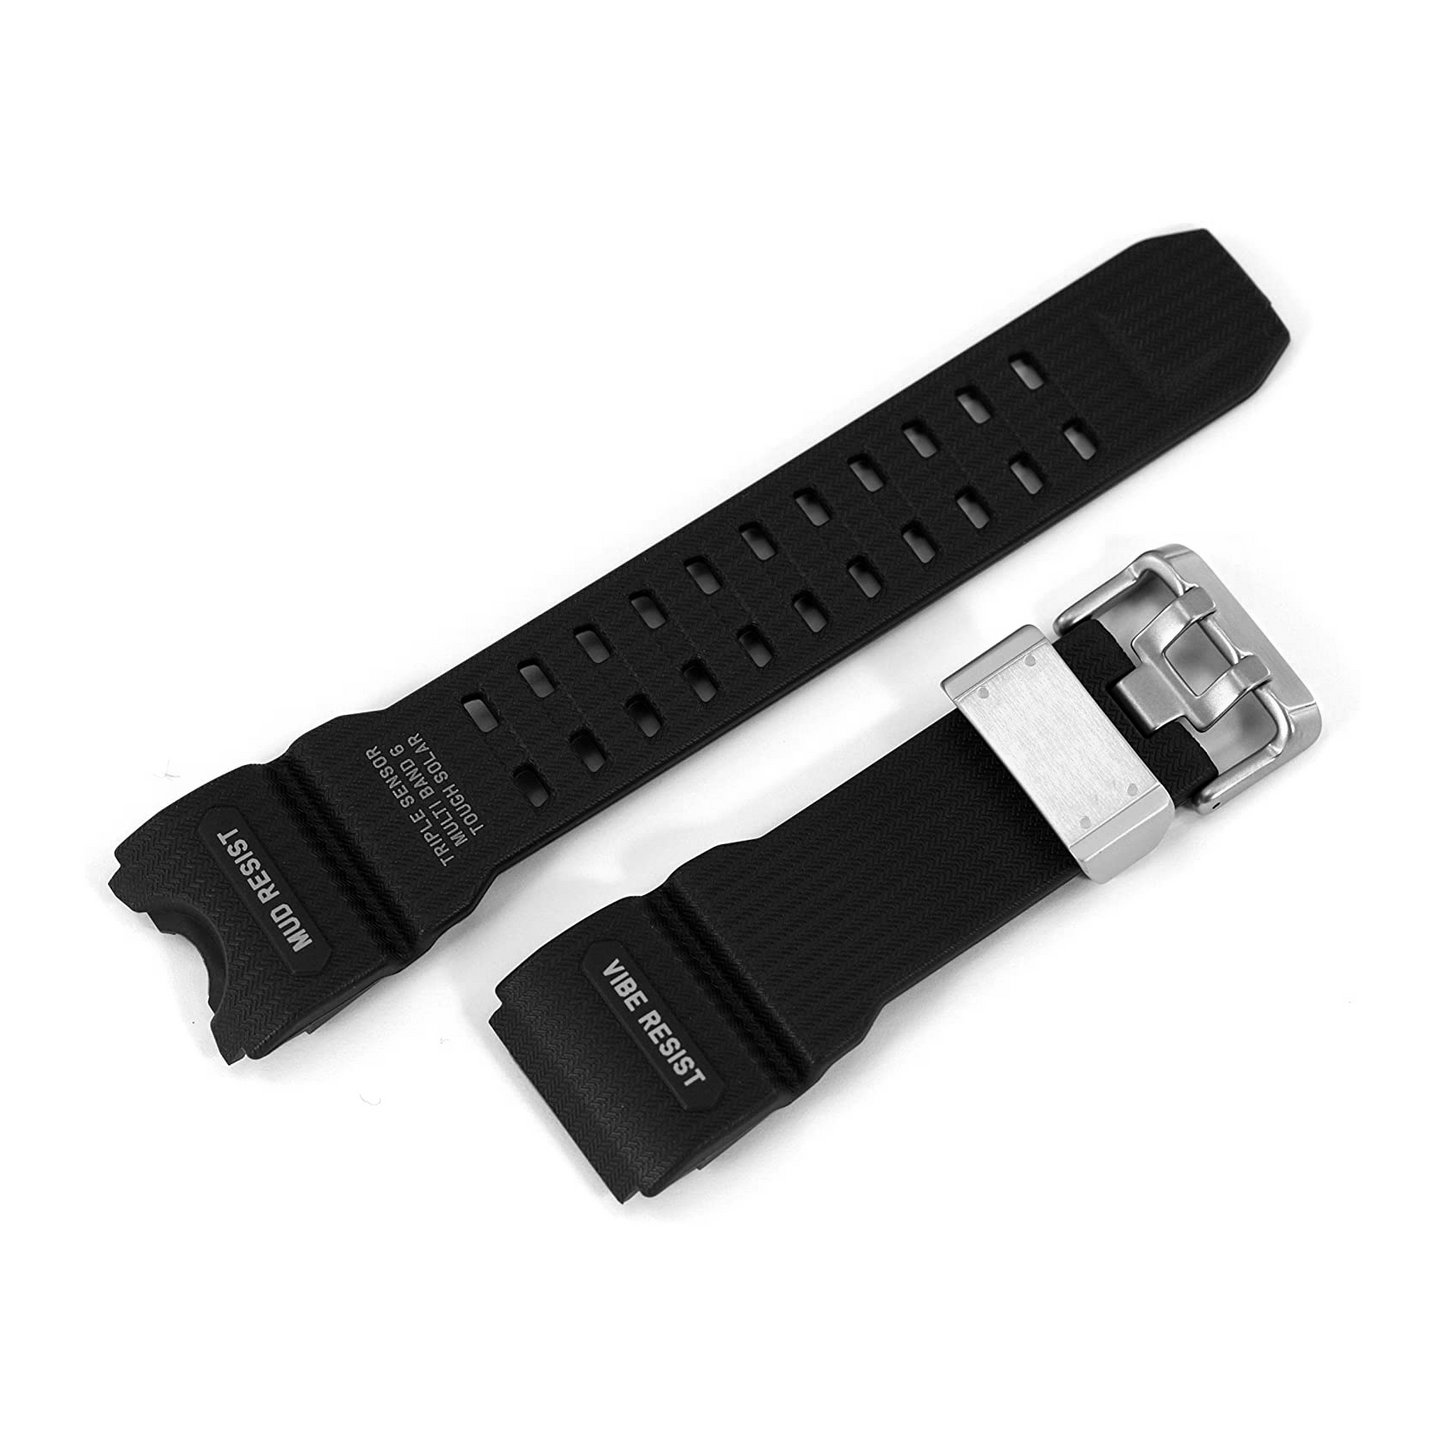 DBLACK [CDS12] RESIN WATCH STRAP (BLACK) // COMPATIBLE WITH "CASIO G-SHOCK GWG-1000” MODEL WATCH ONLY